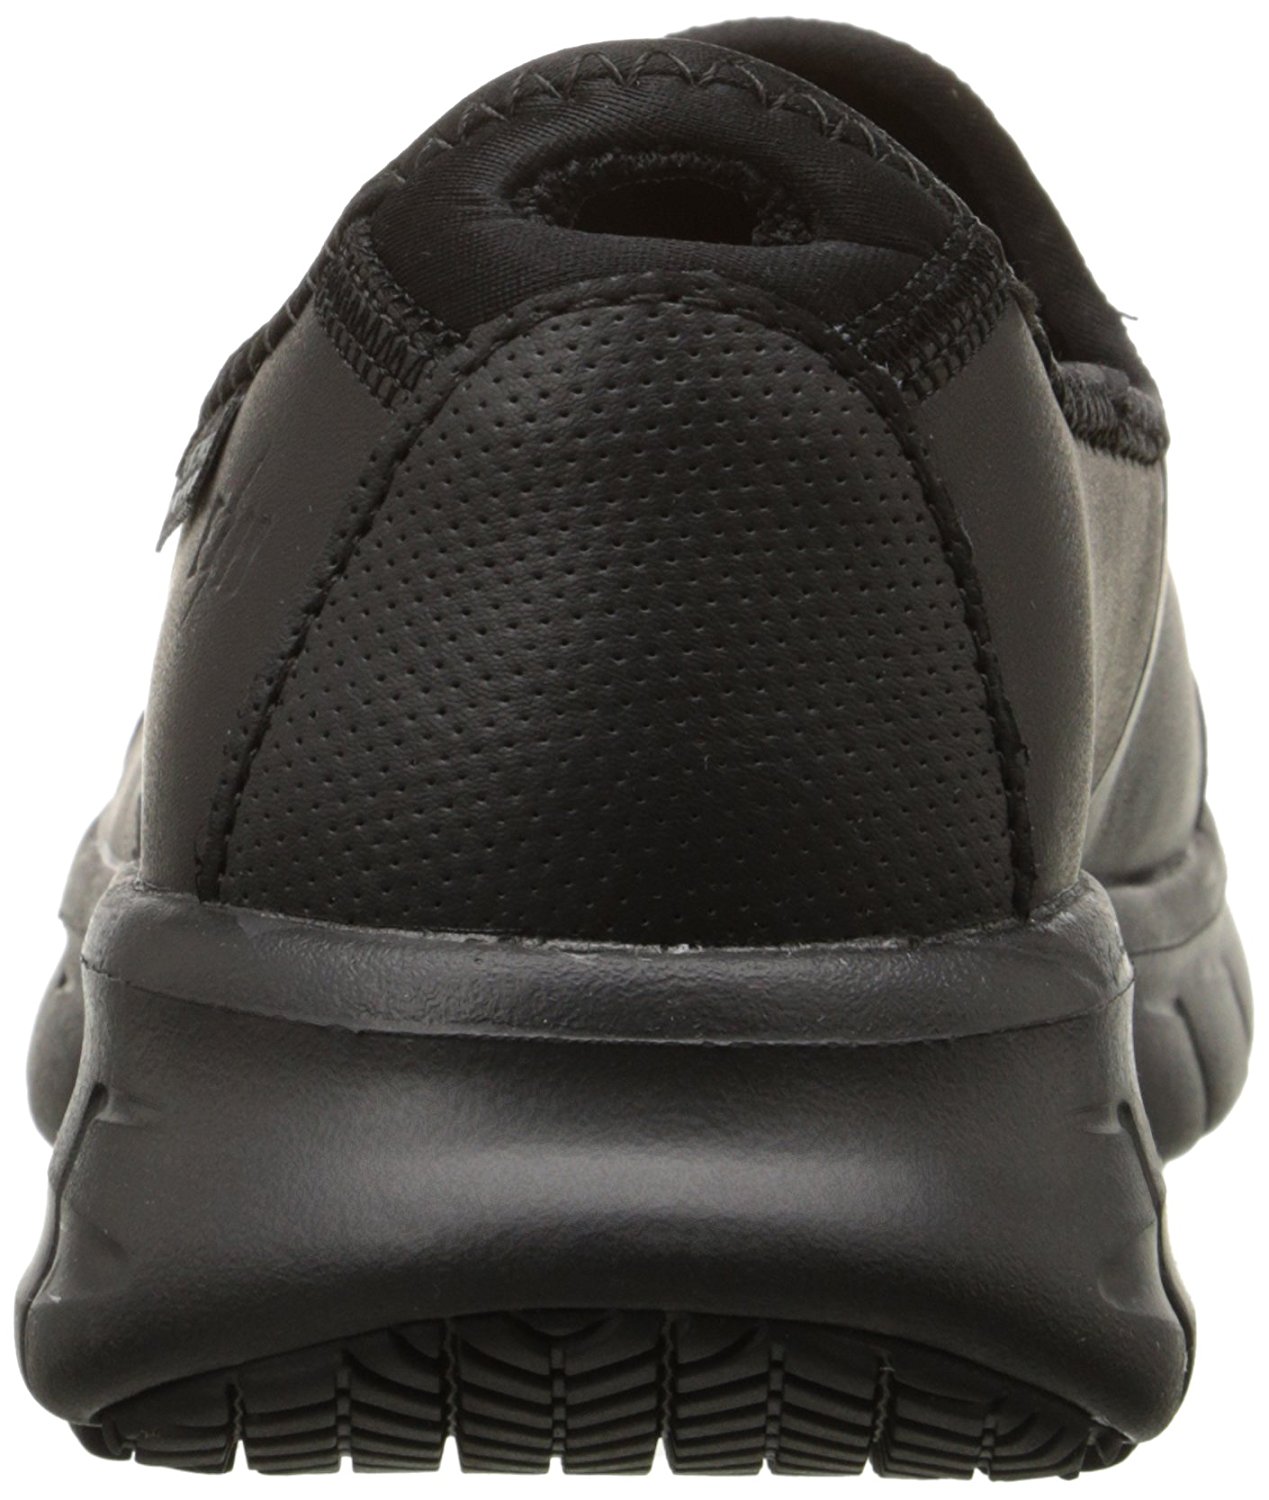 Skechers Womens Sure Track Low Top Pull On Walking Shoes, Black, Size 7 ...